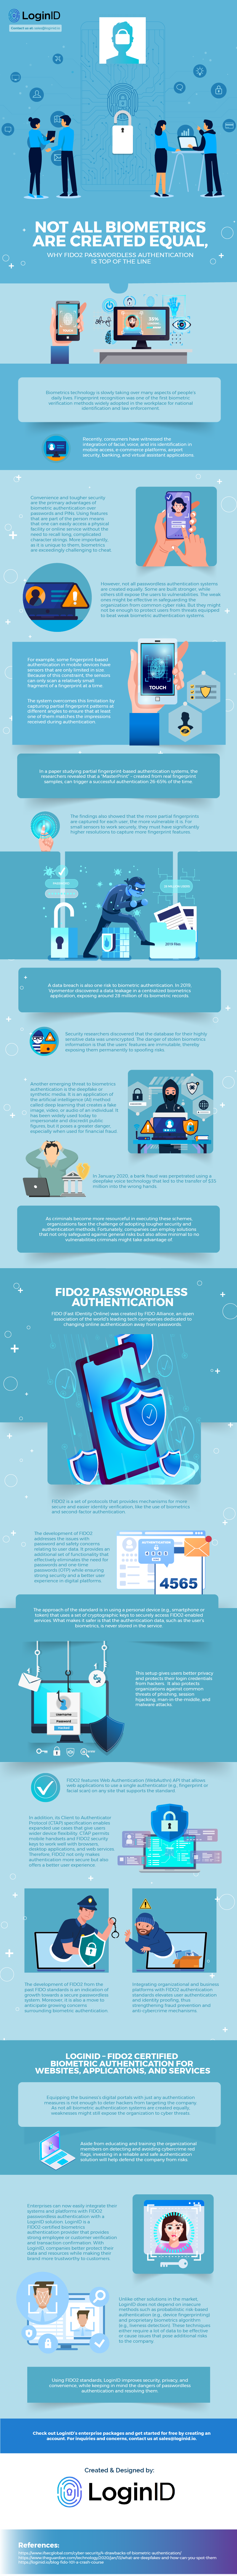 Not All Biometrics are Created Equal, Why FIDO2 Passwordless Authentication is Top of the Line_UW521F